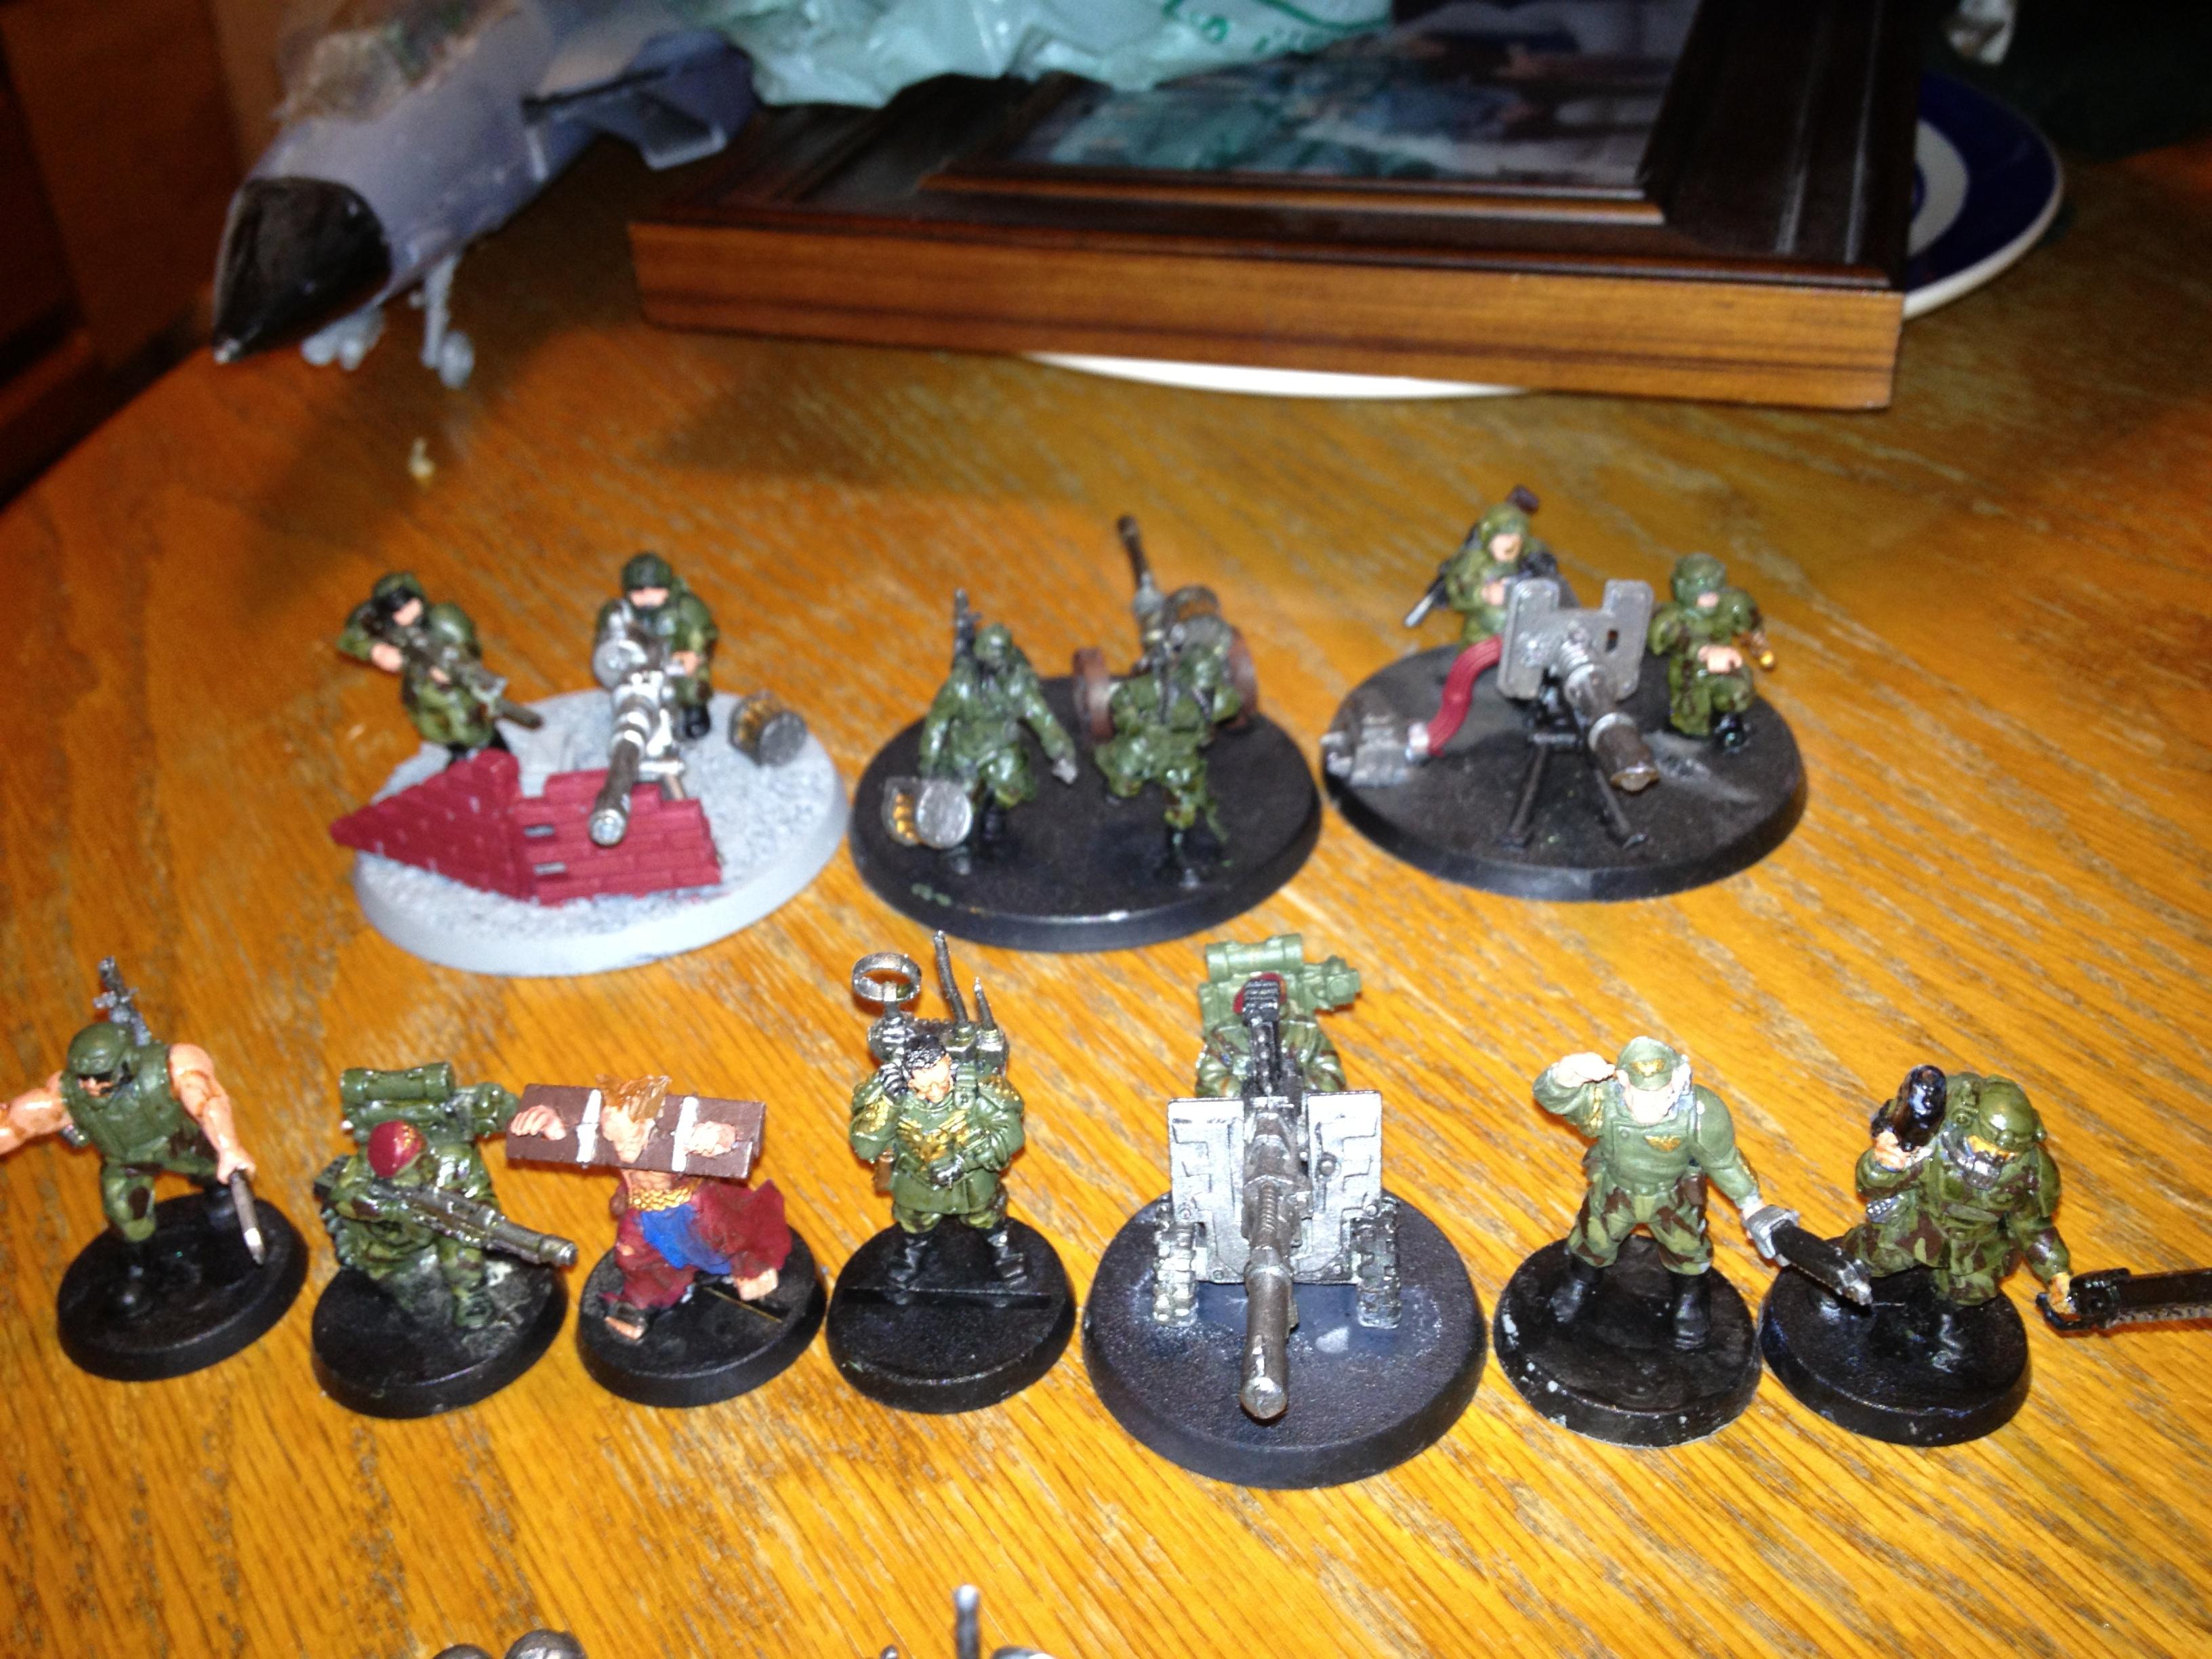 assorted figures waiting for completed squads, along with my figure for a Governor Retrieval Killteam mission